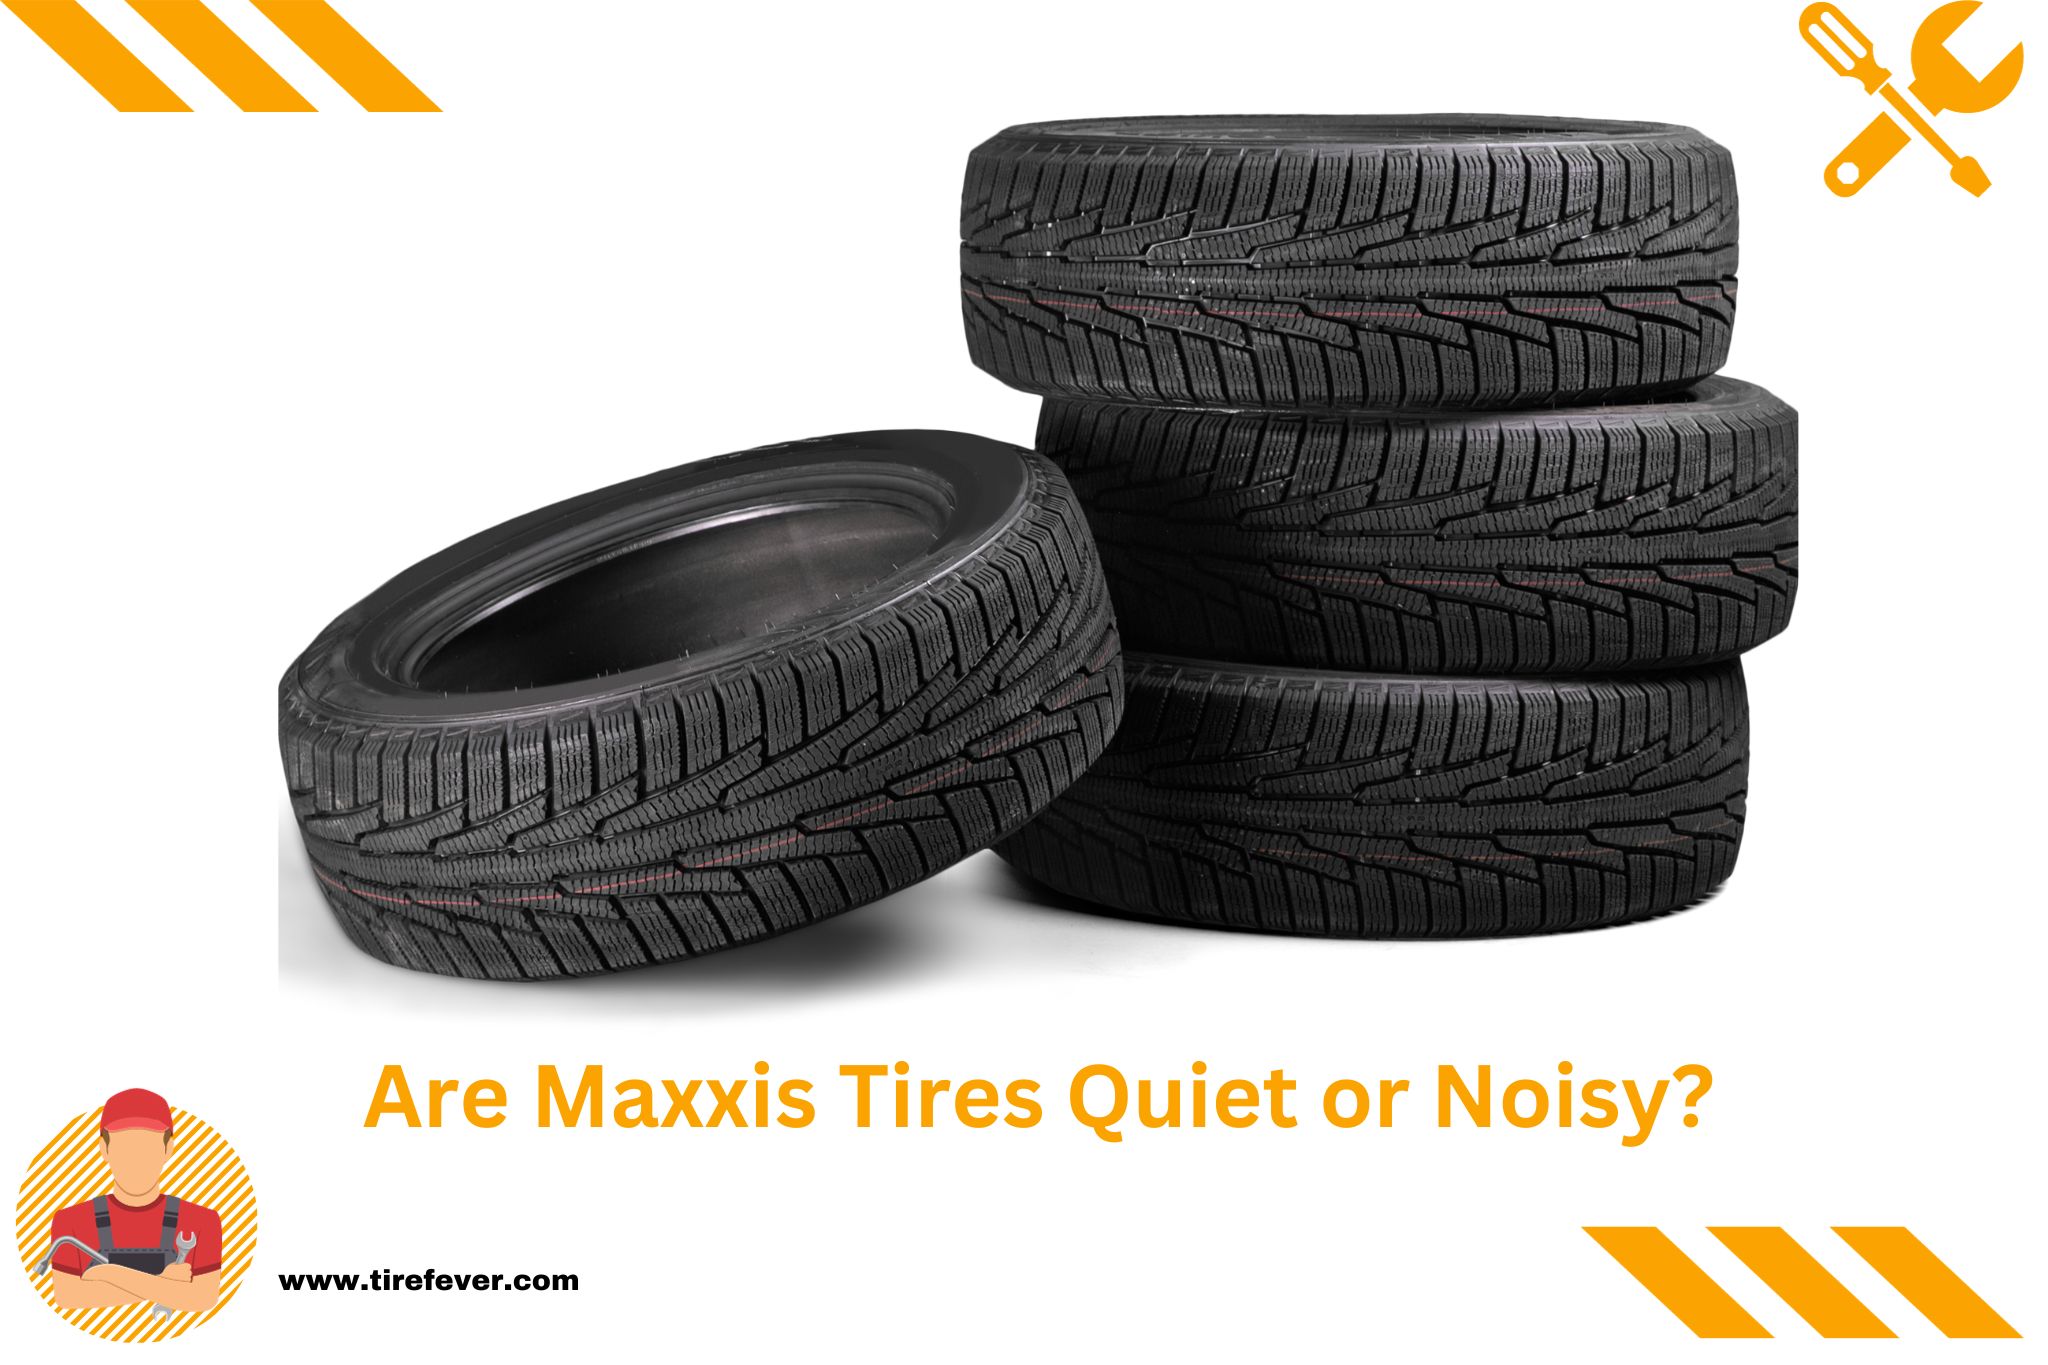 Are Maxxis Tires Quiet or Noisy?